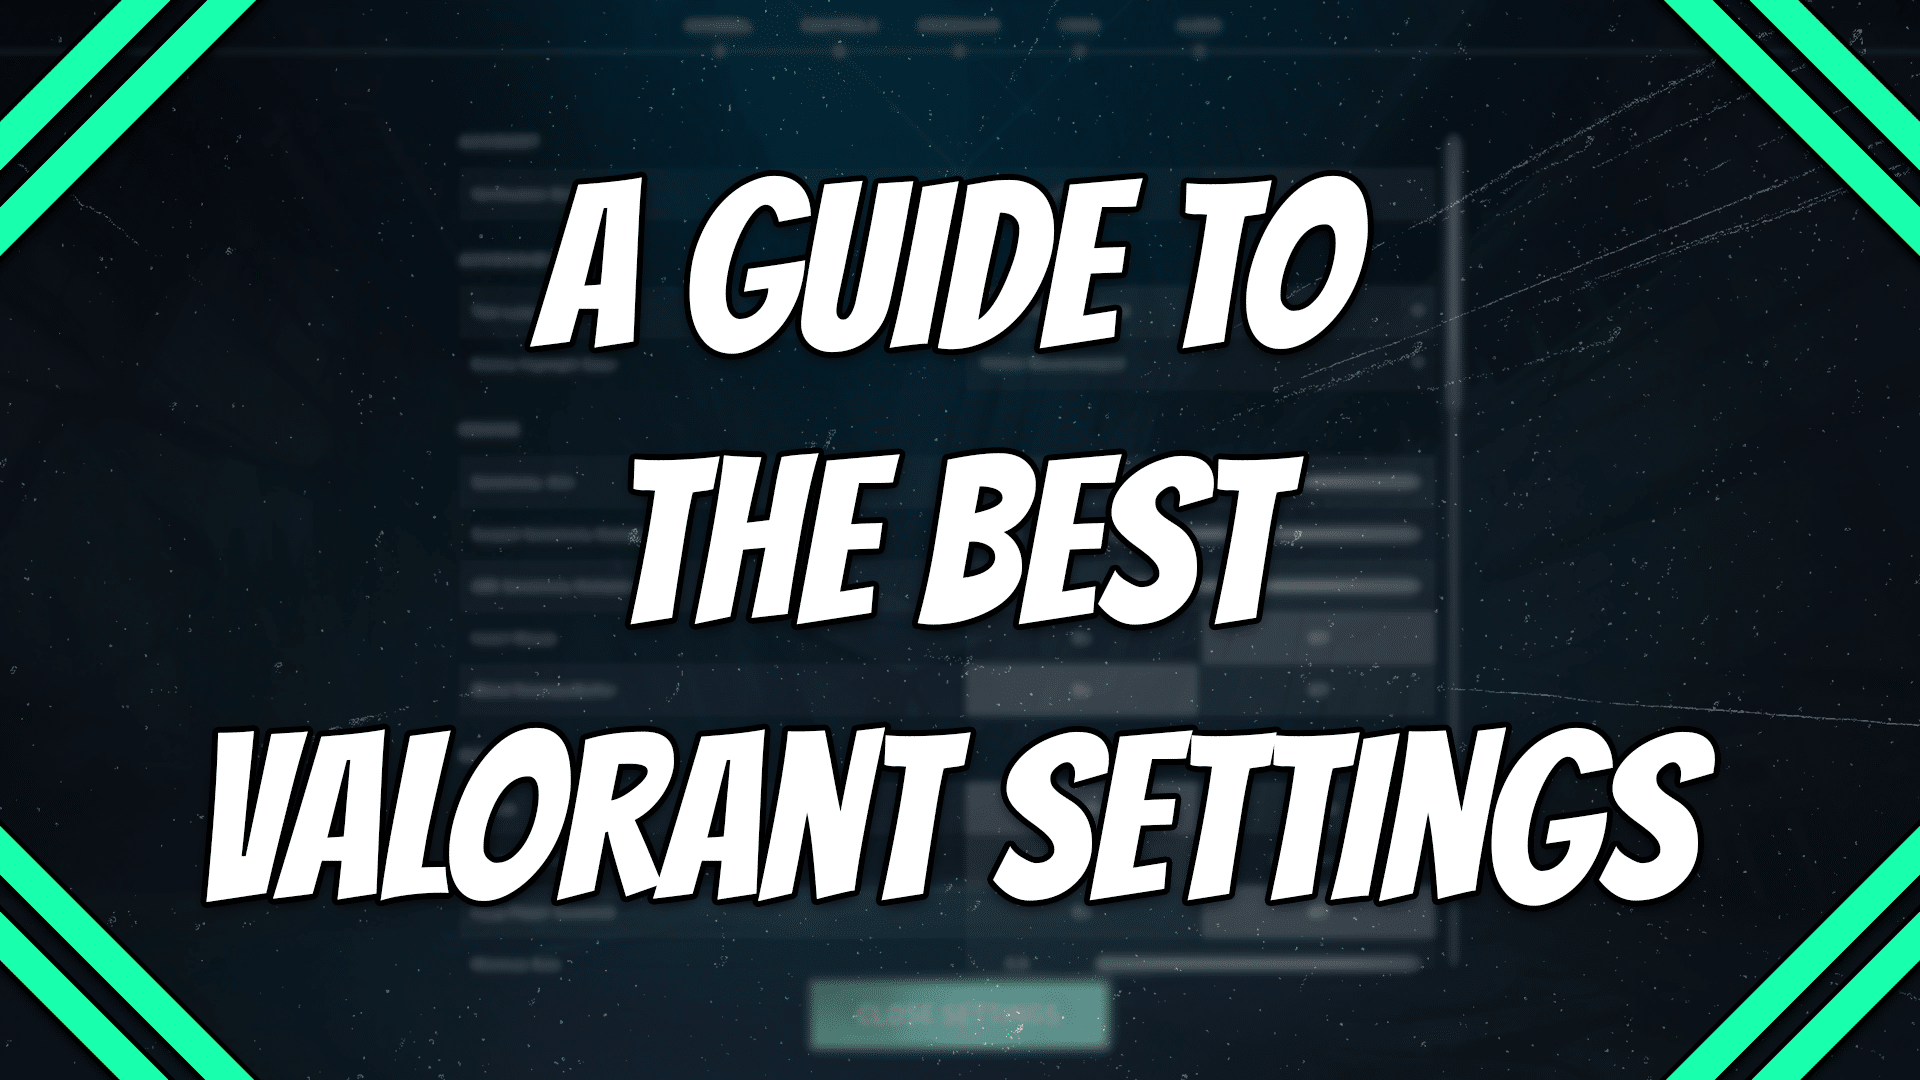 Valorant performance guide: best settings, fps boost, and more